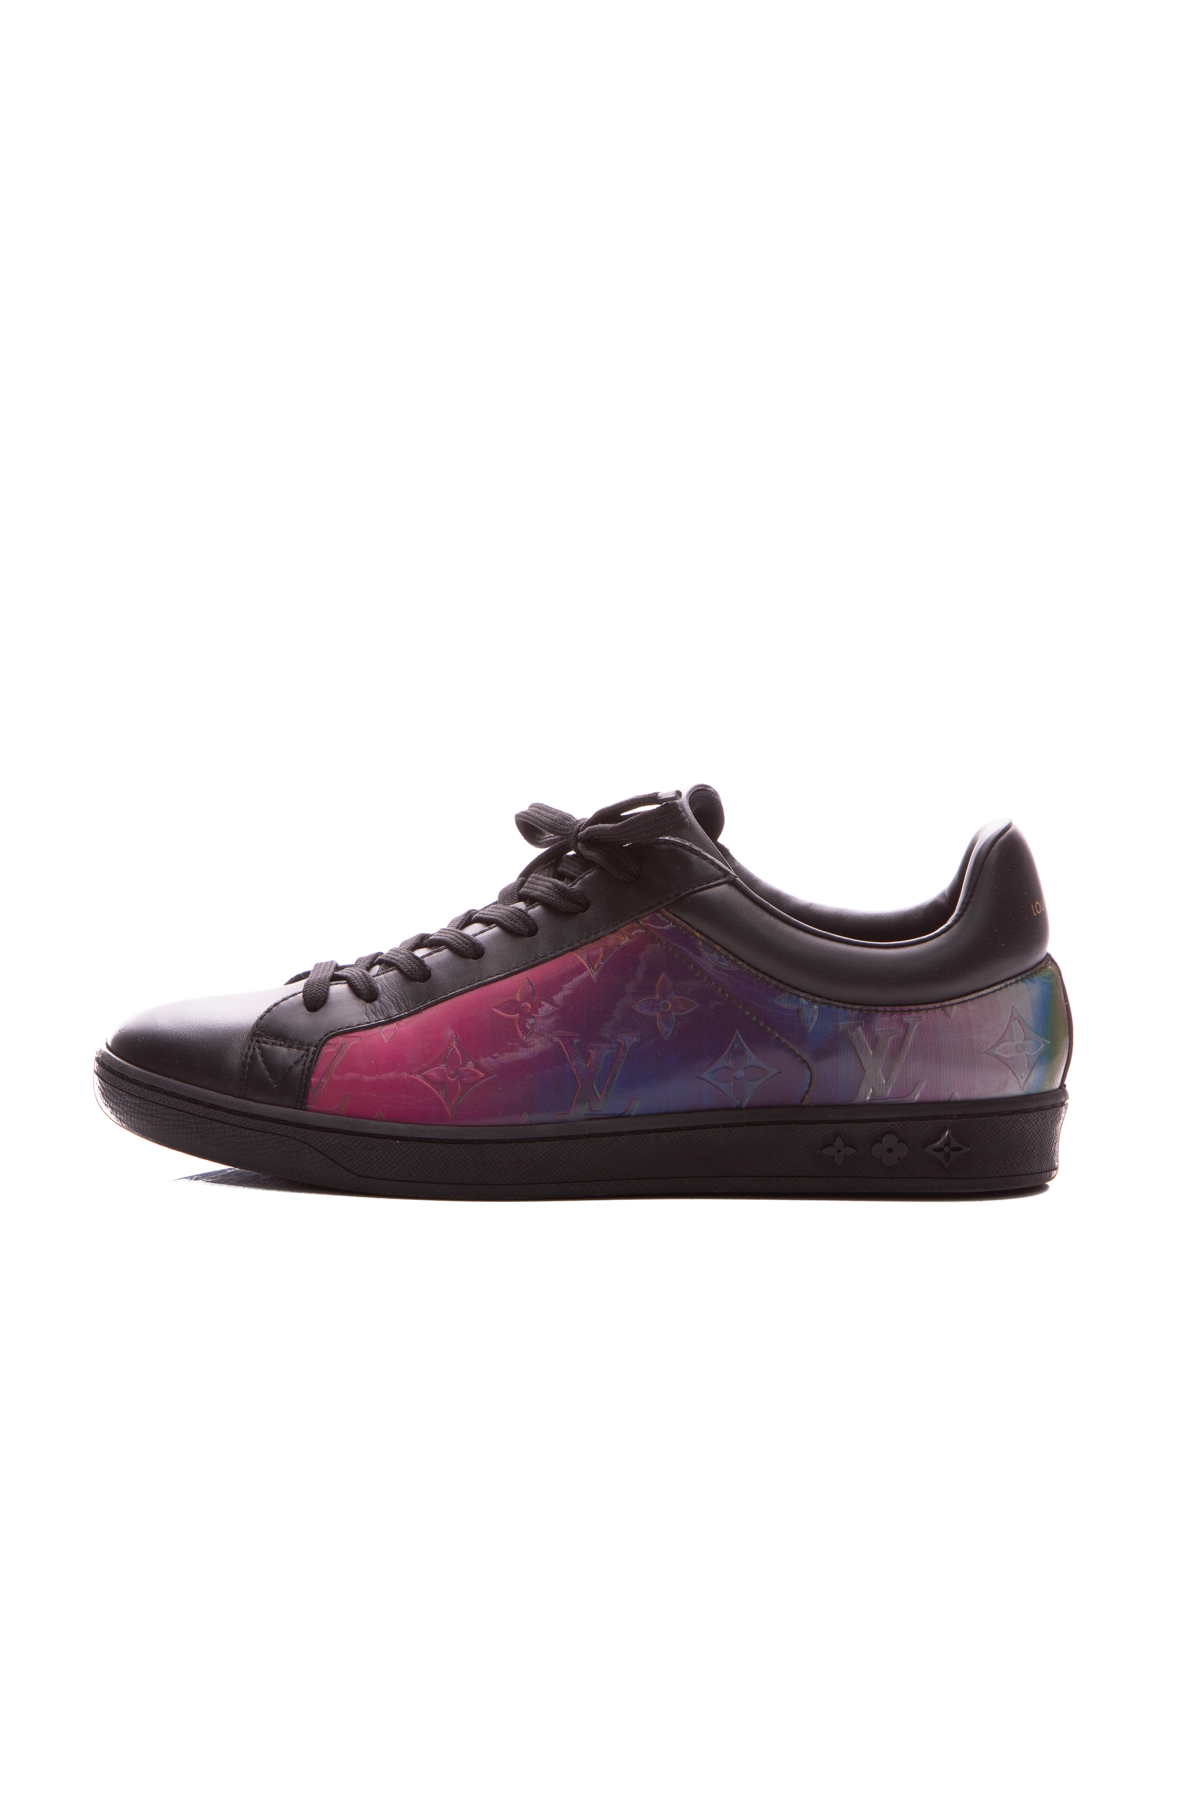 Louis Vuitton Men's Iridescent Luxembourg Sneakers - Size US 8 